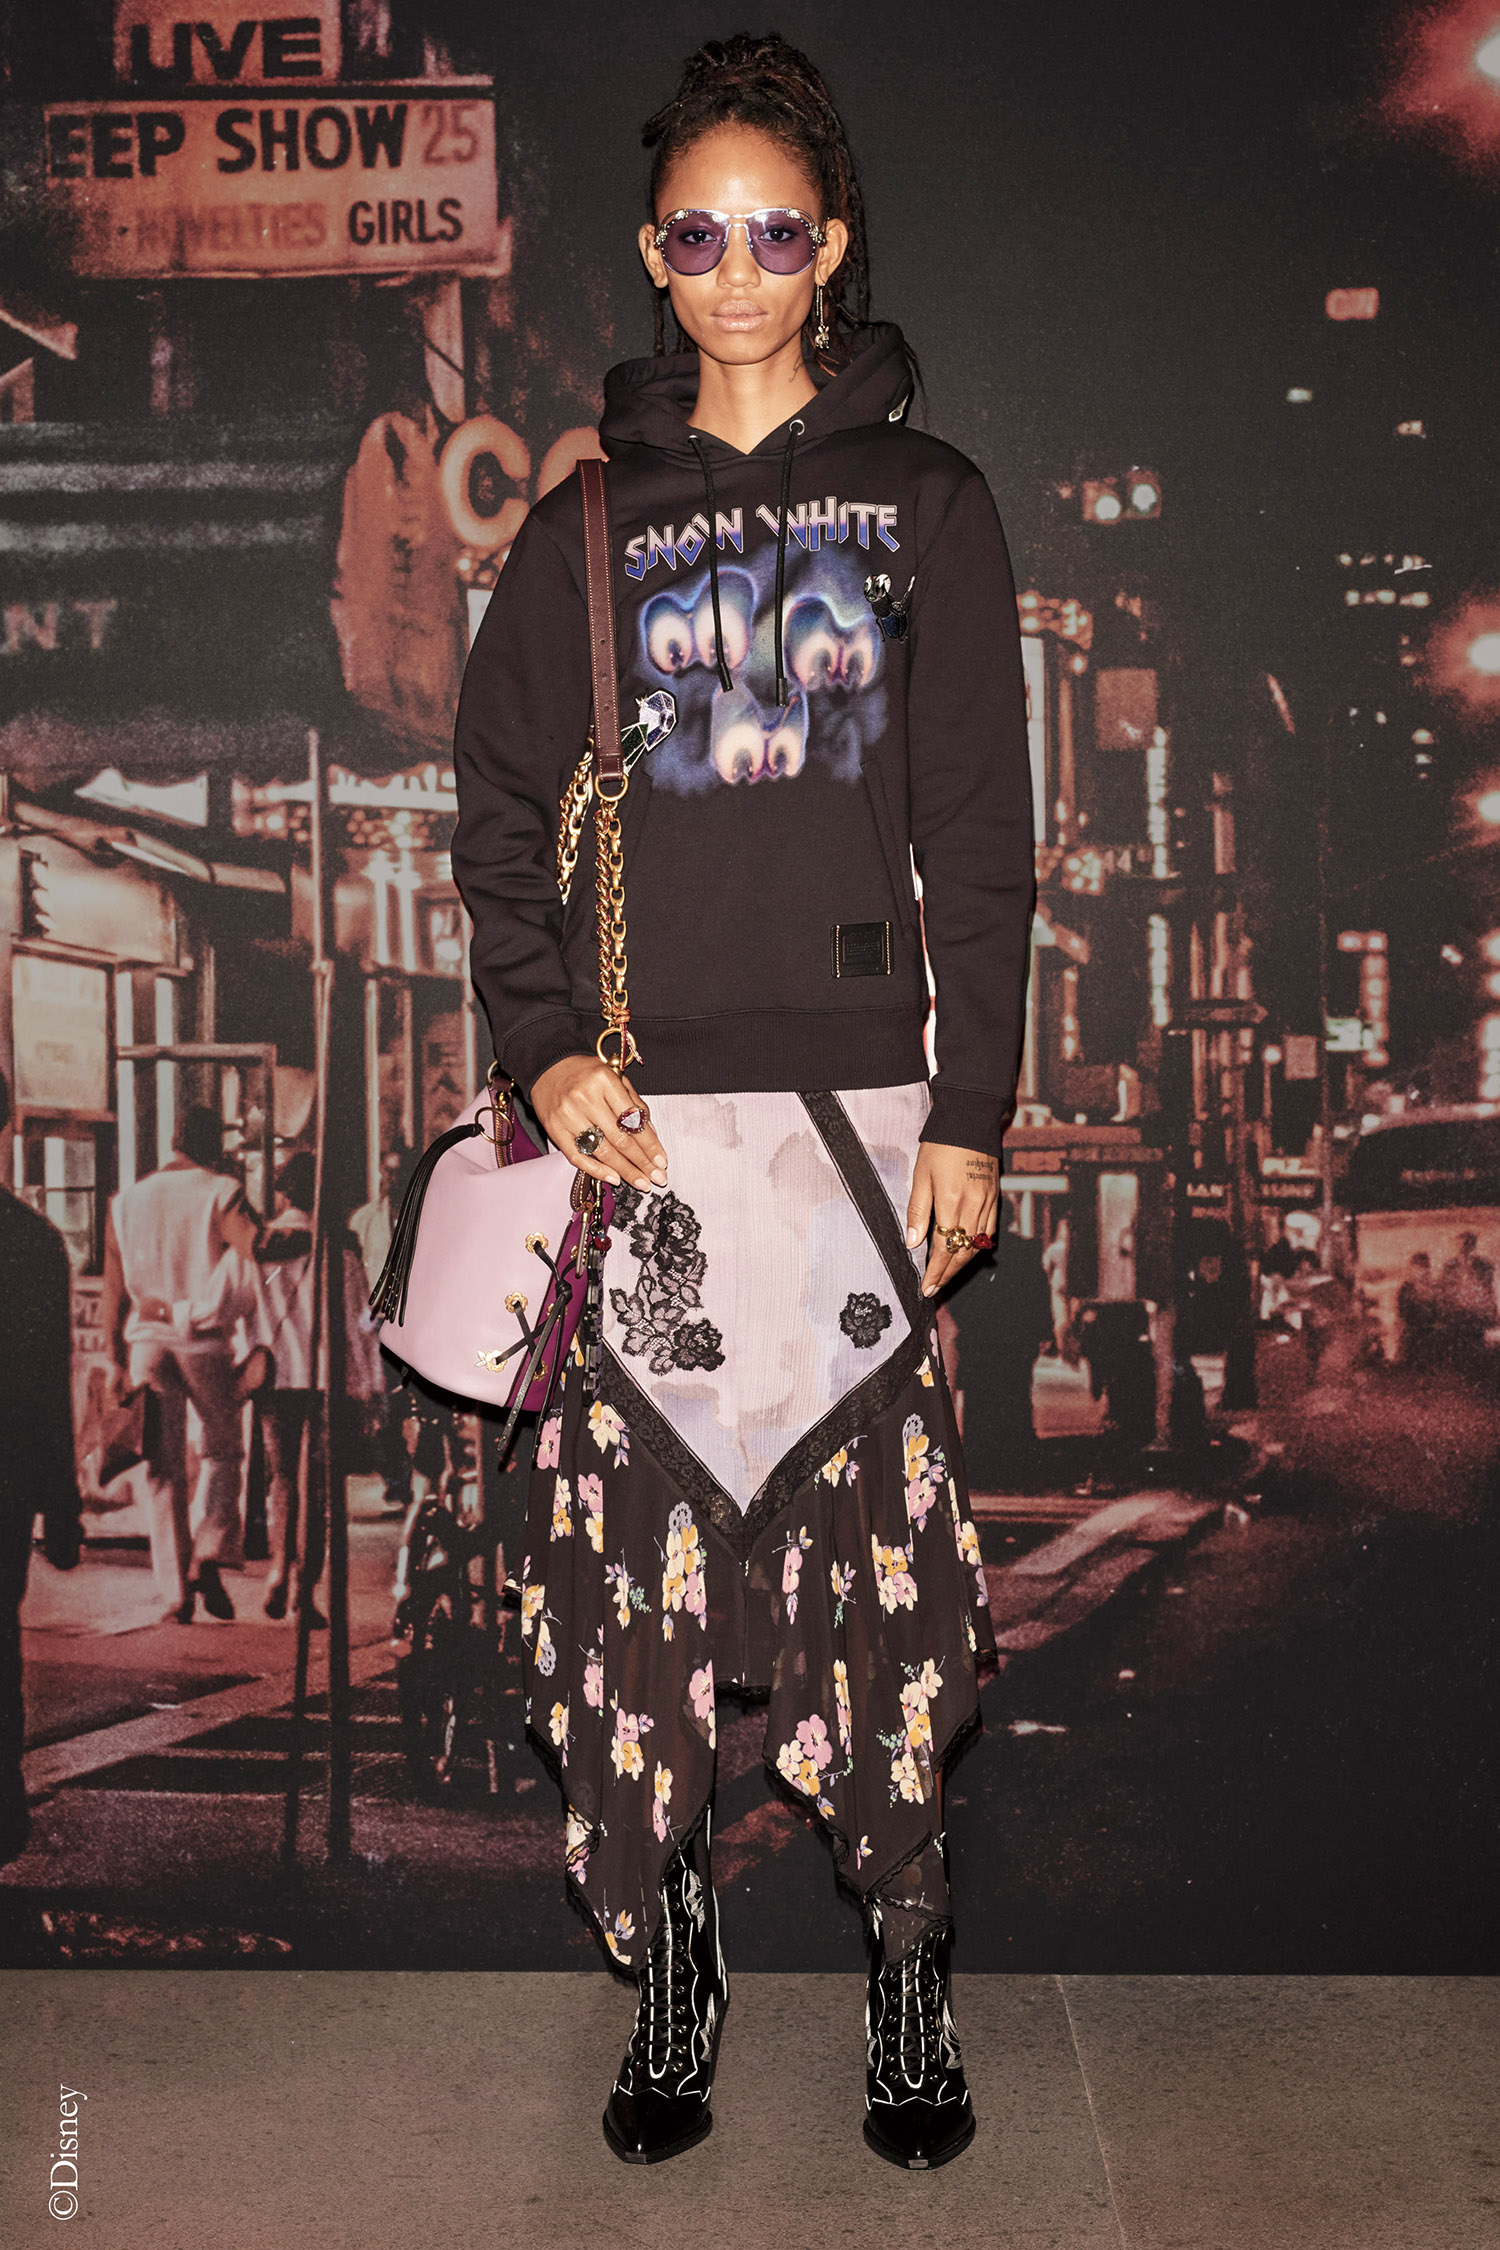 CHECK OUT THE NEW DISNEY X COACH COLLAB - INDIE Magazine